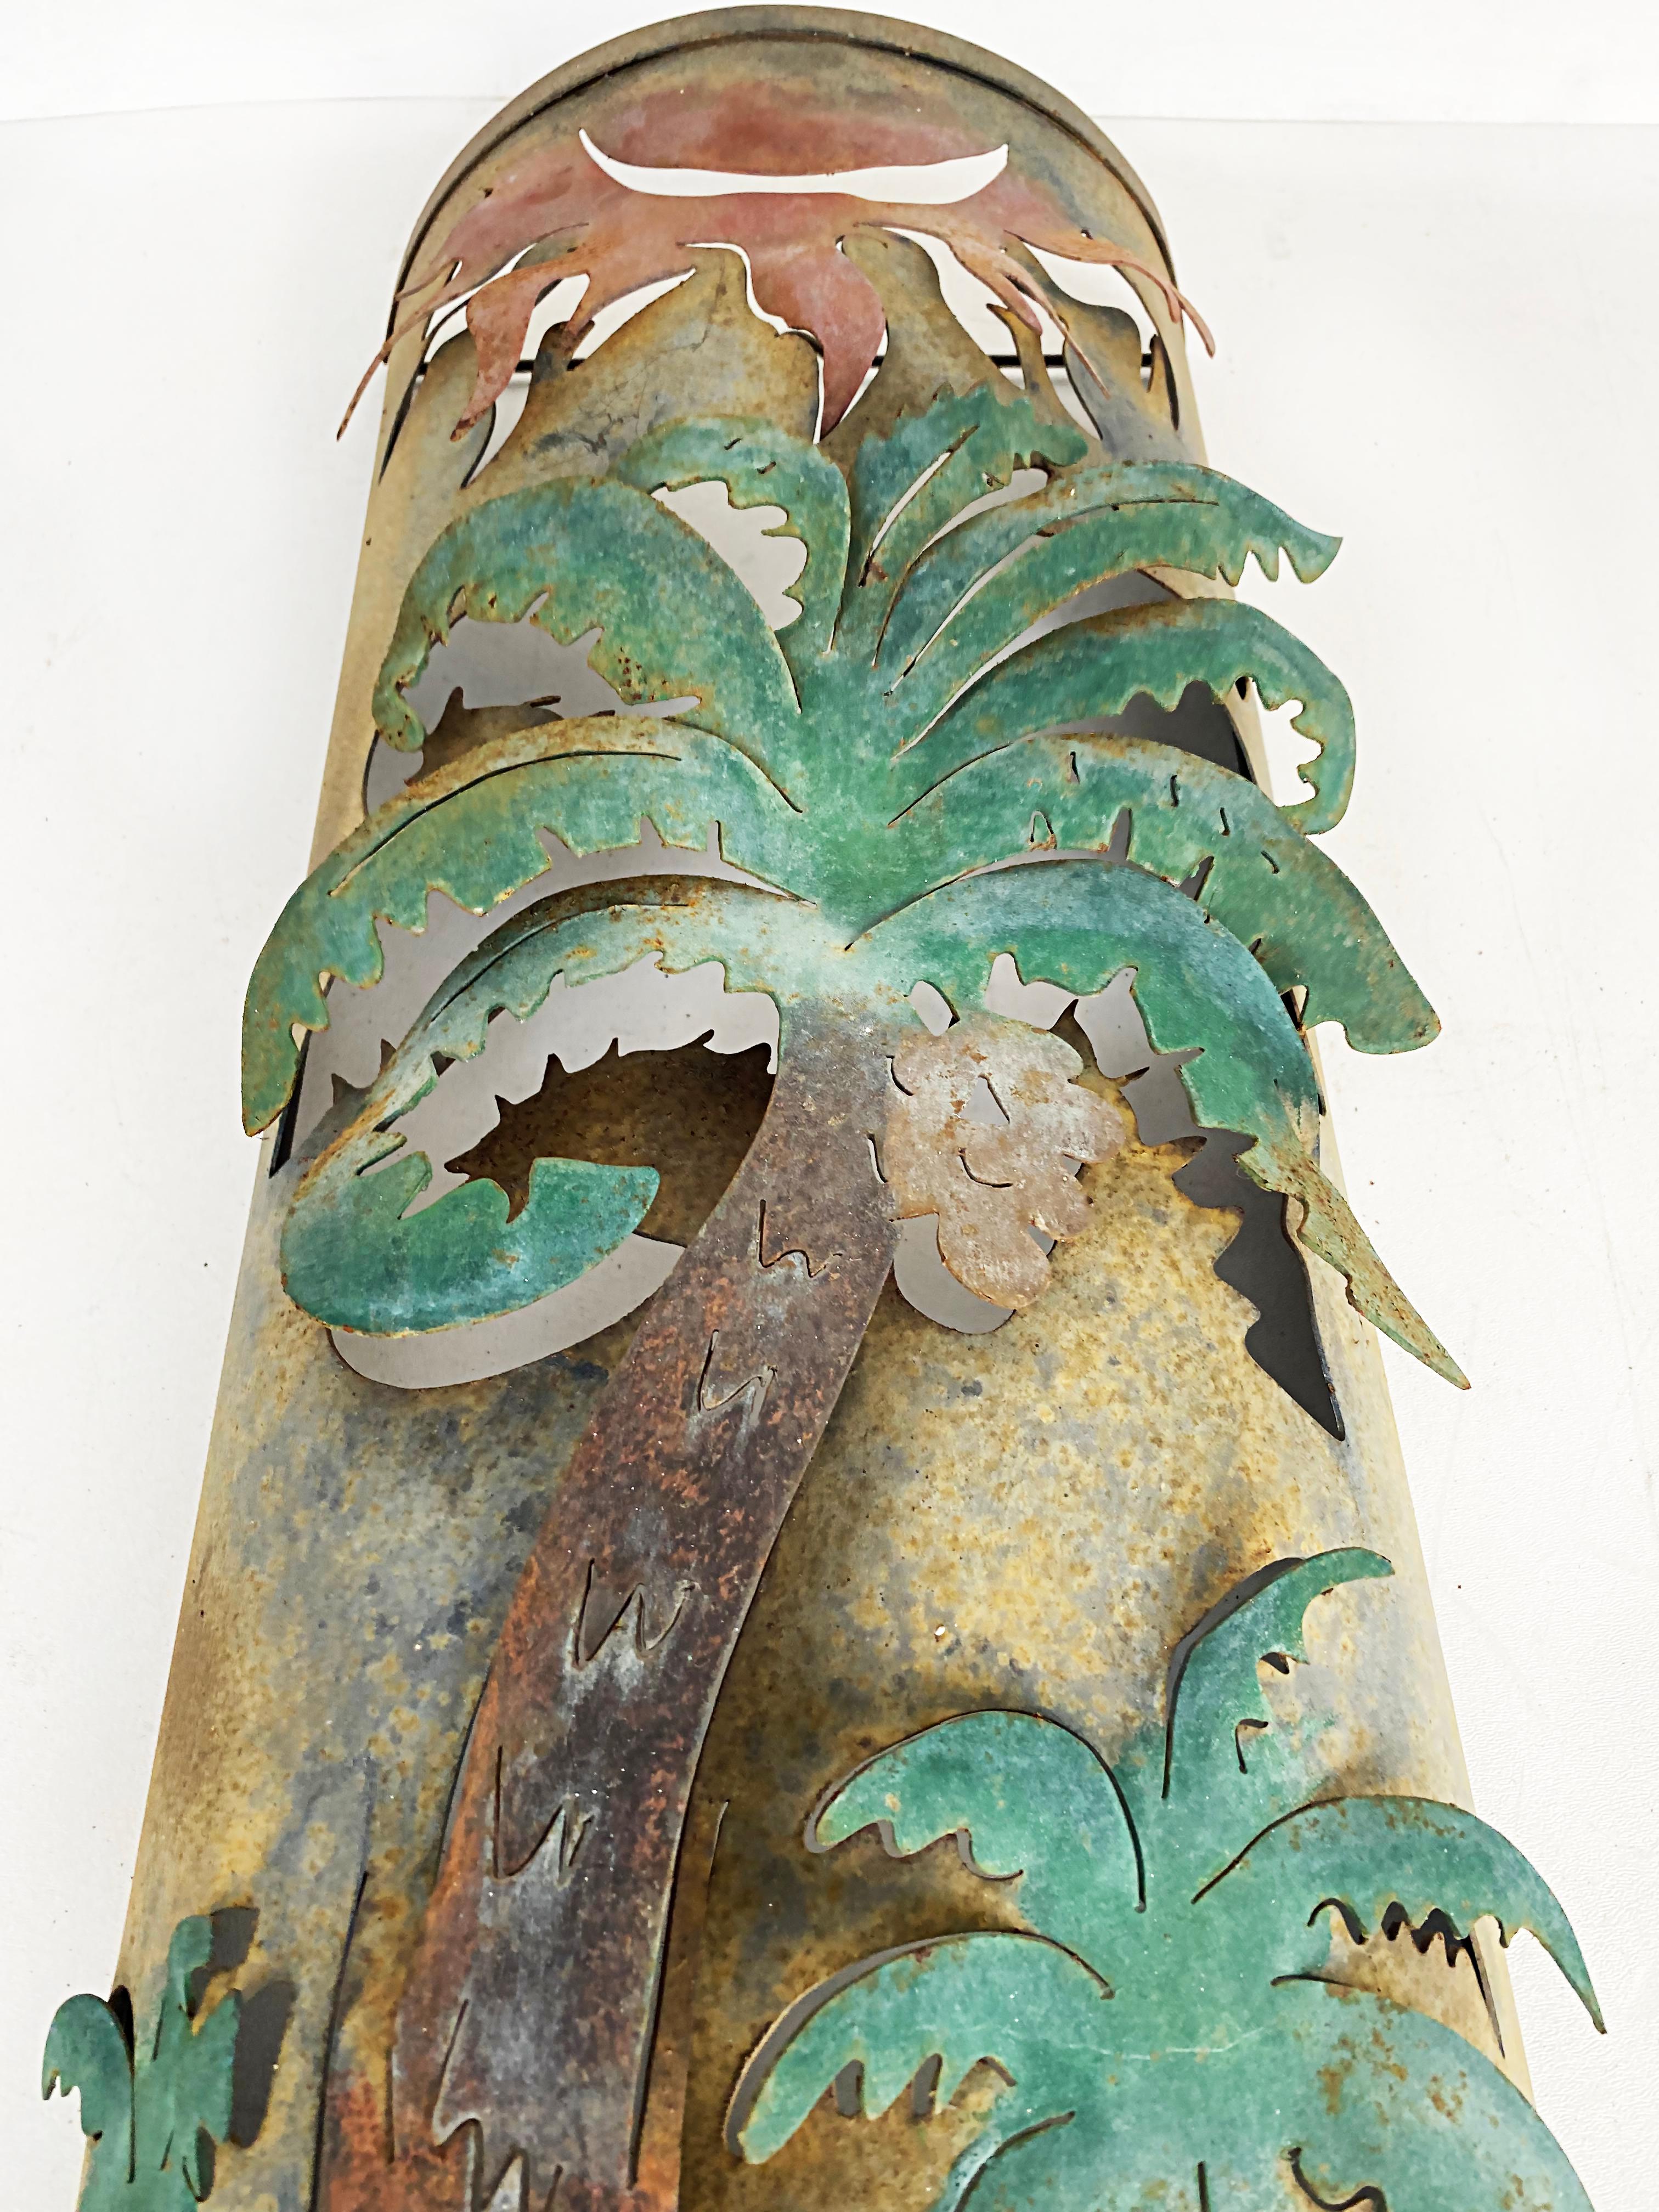 Tropical exterior metal painted palm tree wall sculpture.

Offered for sale is a tropical, outdoor mixed metal painted palm tree wall sculpture. This work is from an amazing Miami Beach island estate where this fun outdoor sculpture adorned an